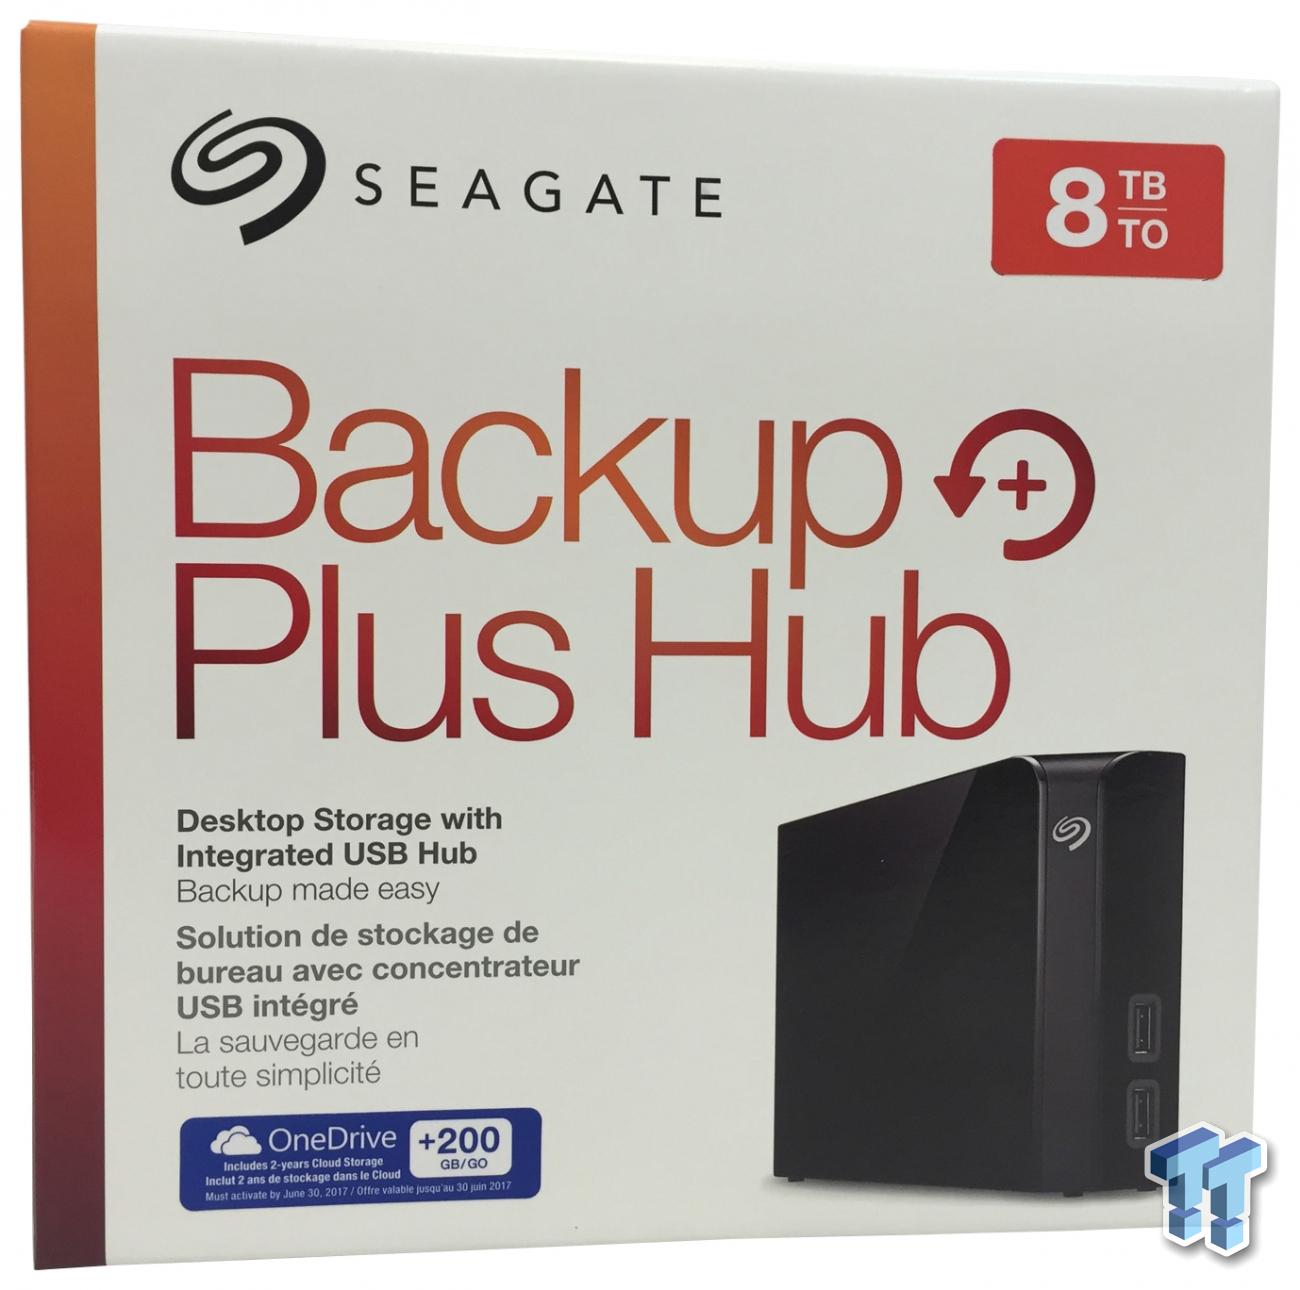 Seagate Backup Plus External Hard Drive Review 2020 Love My Surface